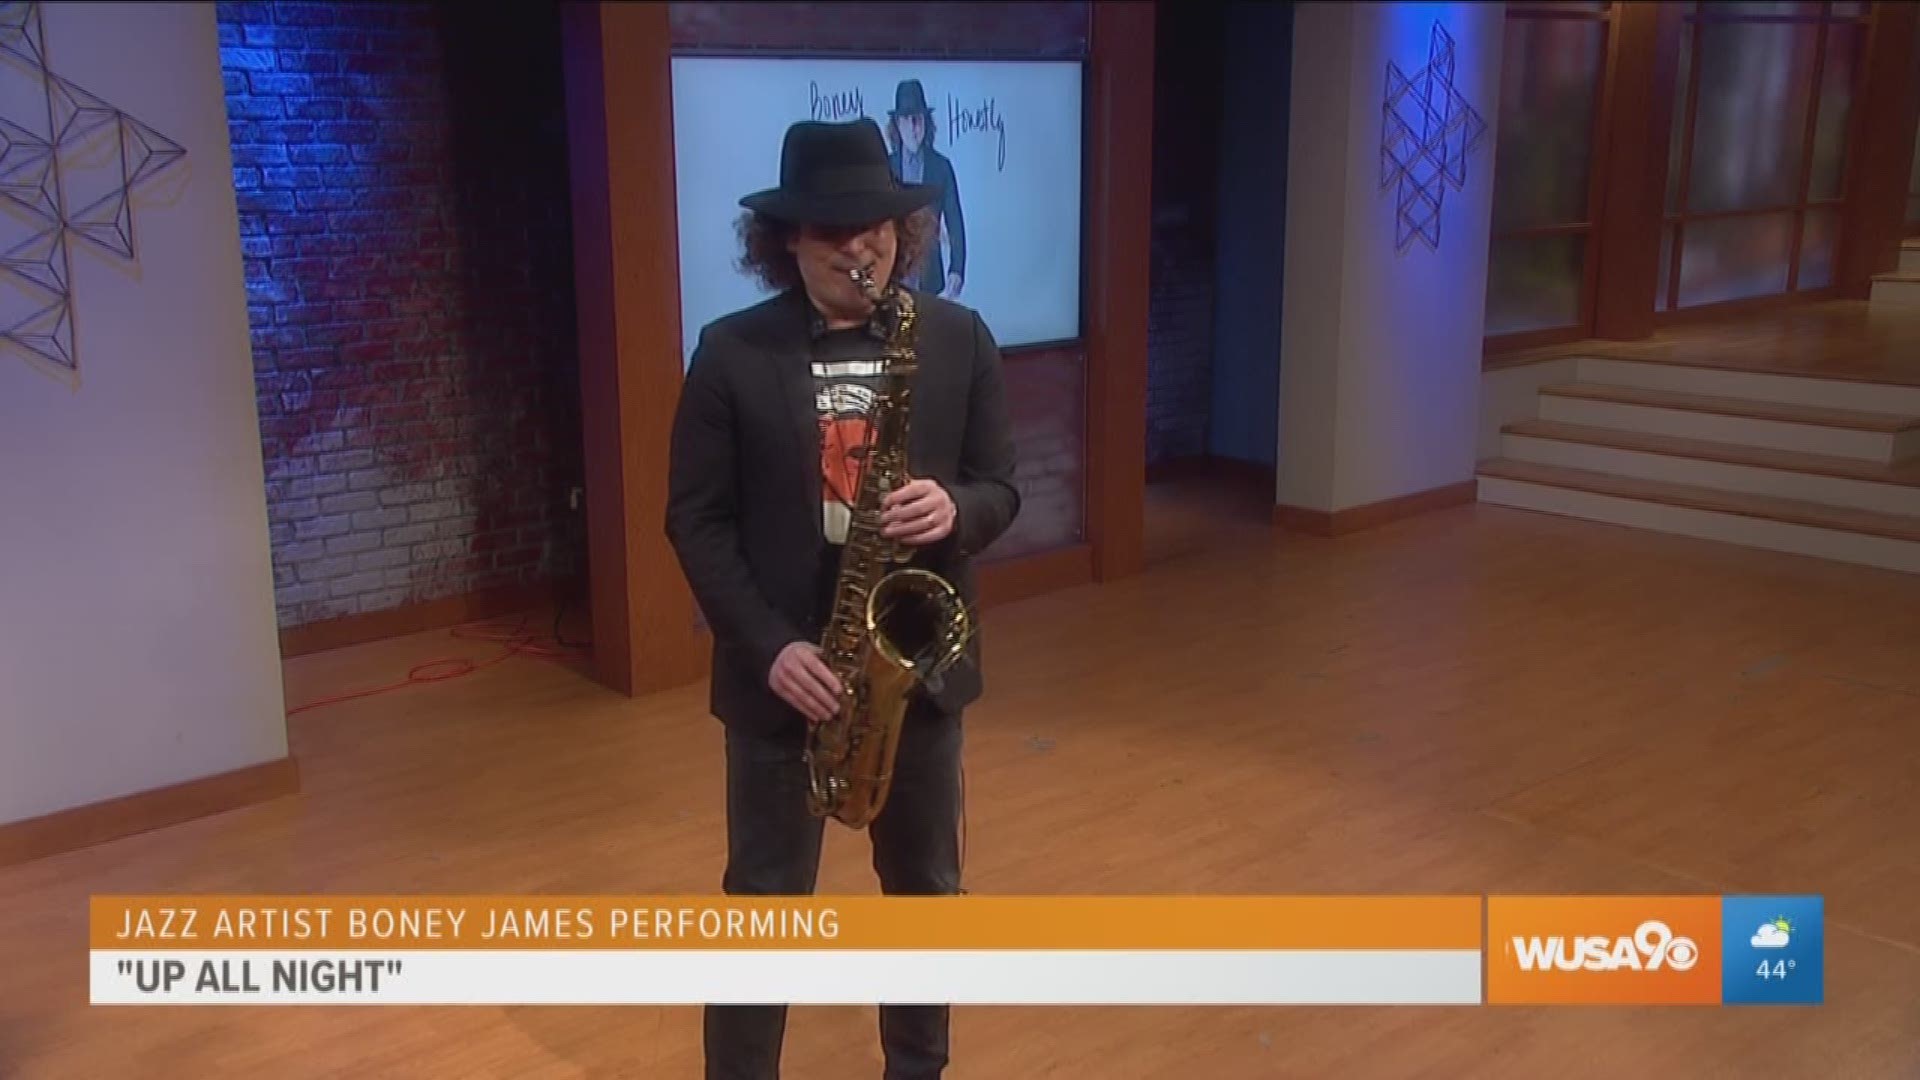 Four-time Grammy award nominee and multi-platinum musician Boney James stopped by Great Day to perform 'Up All Night'!